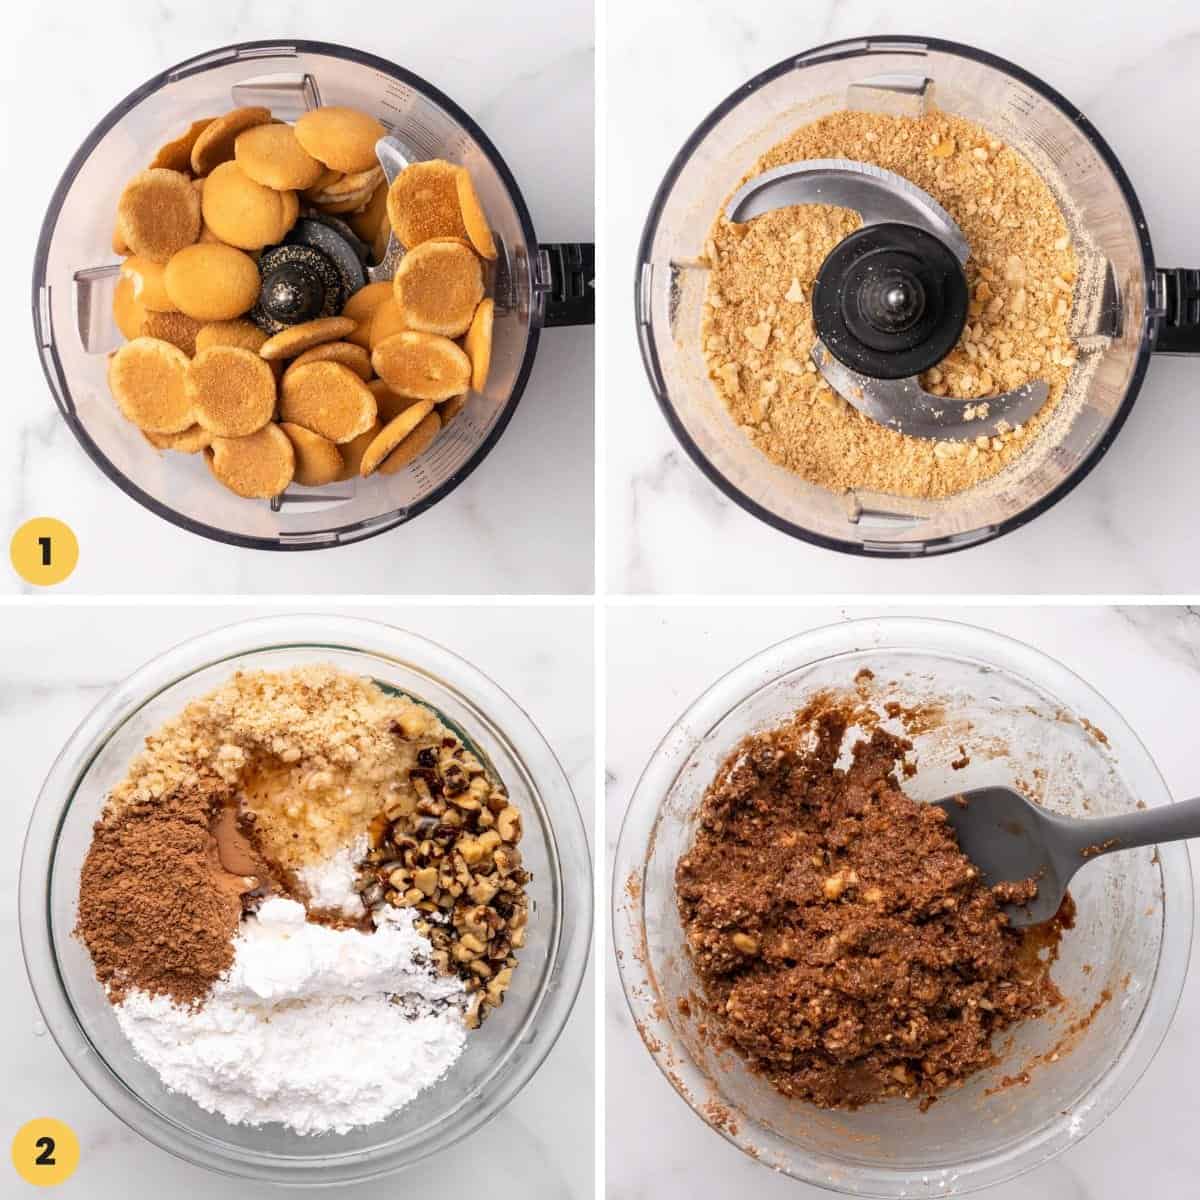 a collage of images showing how to make rum balls by crushing nilla wafers in a food processor and then mixing with the other ingredients to form a paste.